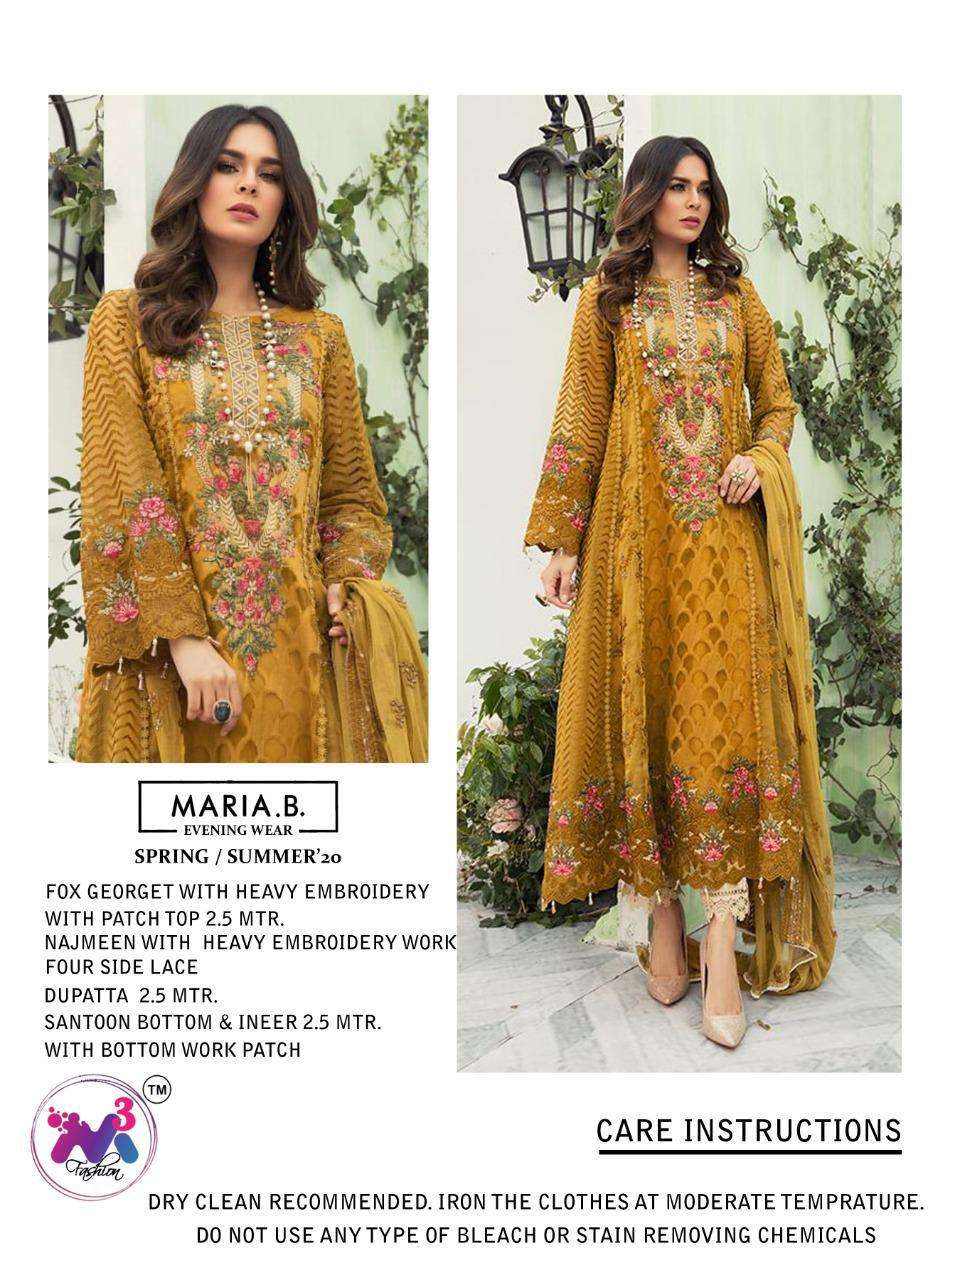 MARIA.B BY M3 FASHION 1001-A TO 1001-E SERIES BEAUTIFUL SUITS STYLISH FANCY COLORFUL CASUAL WEAR & ETHNIC WEAR FAUX GEORGETTE WITH EMBROIDERY DRESSES AT WHOLESALE PRICE